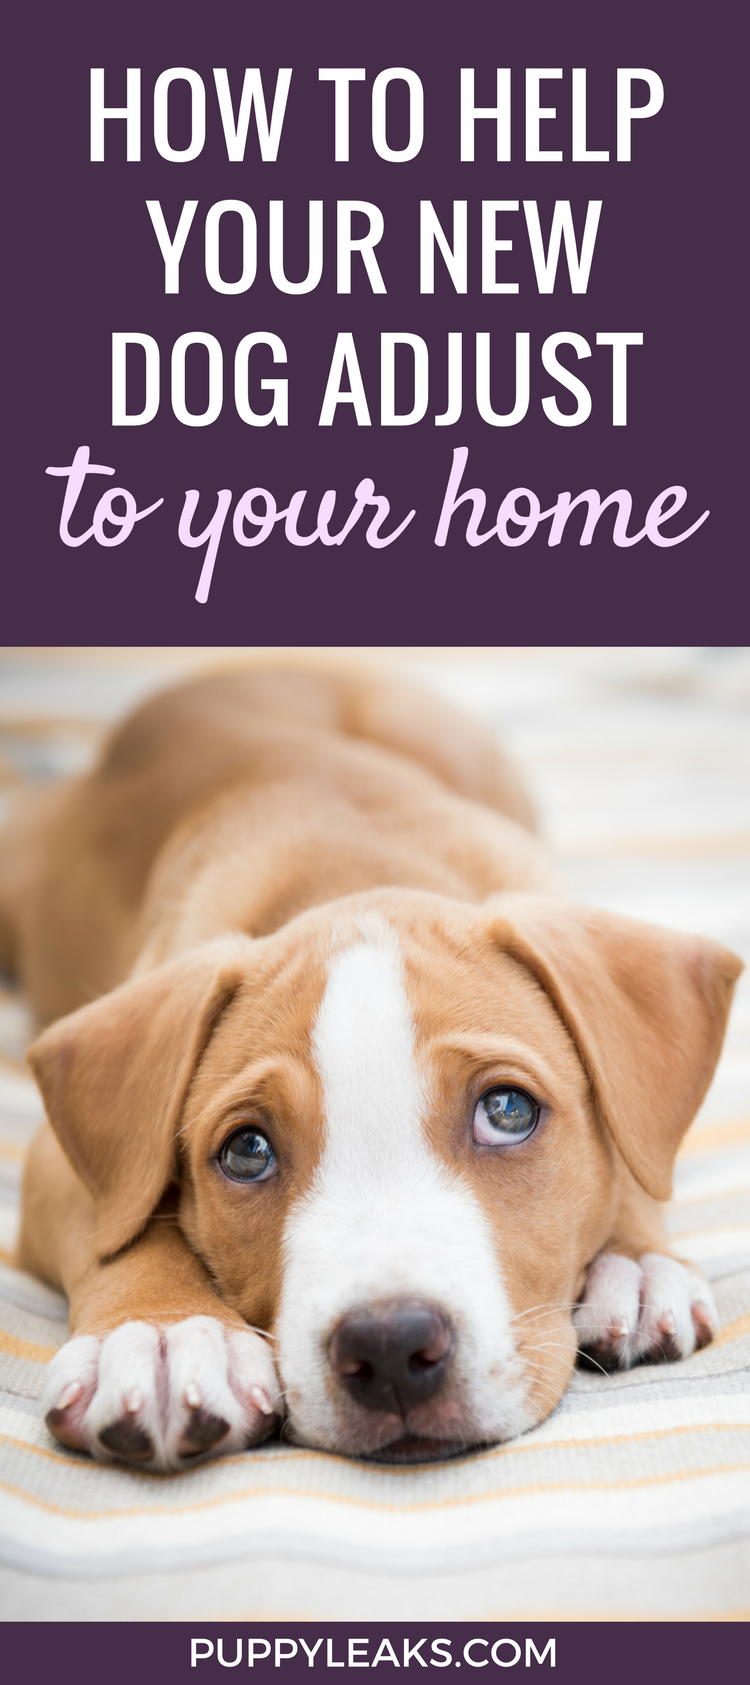 10 Tips for Helping Your Dog Adjust To Their New Home